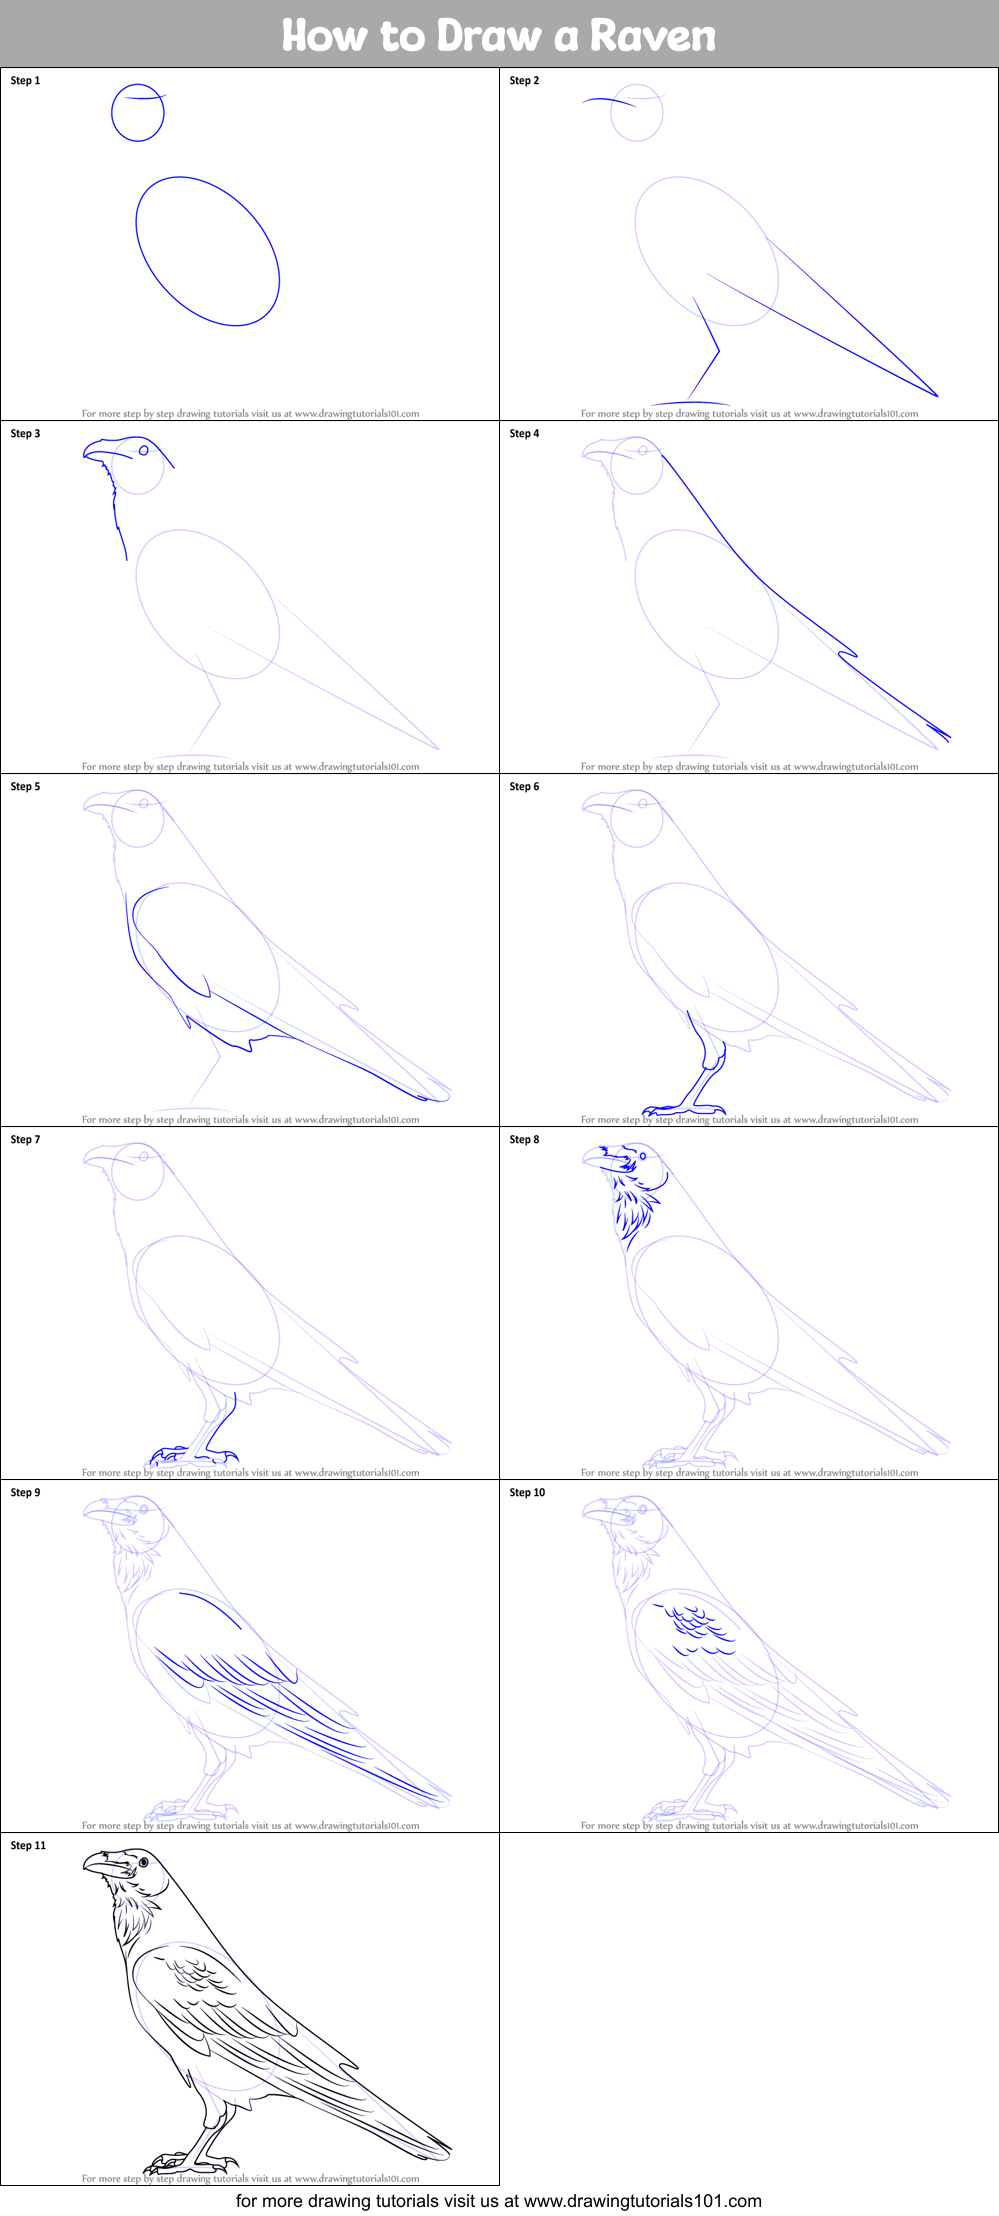 Great How To Draw Raven Step By Step in the world Check it out now 